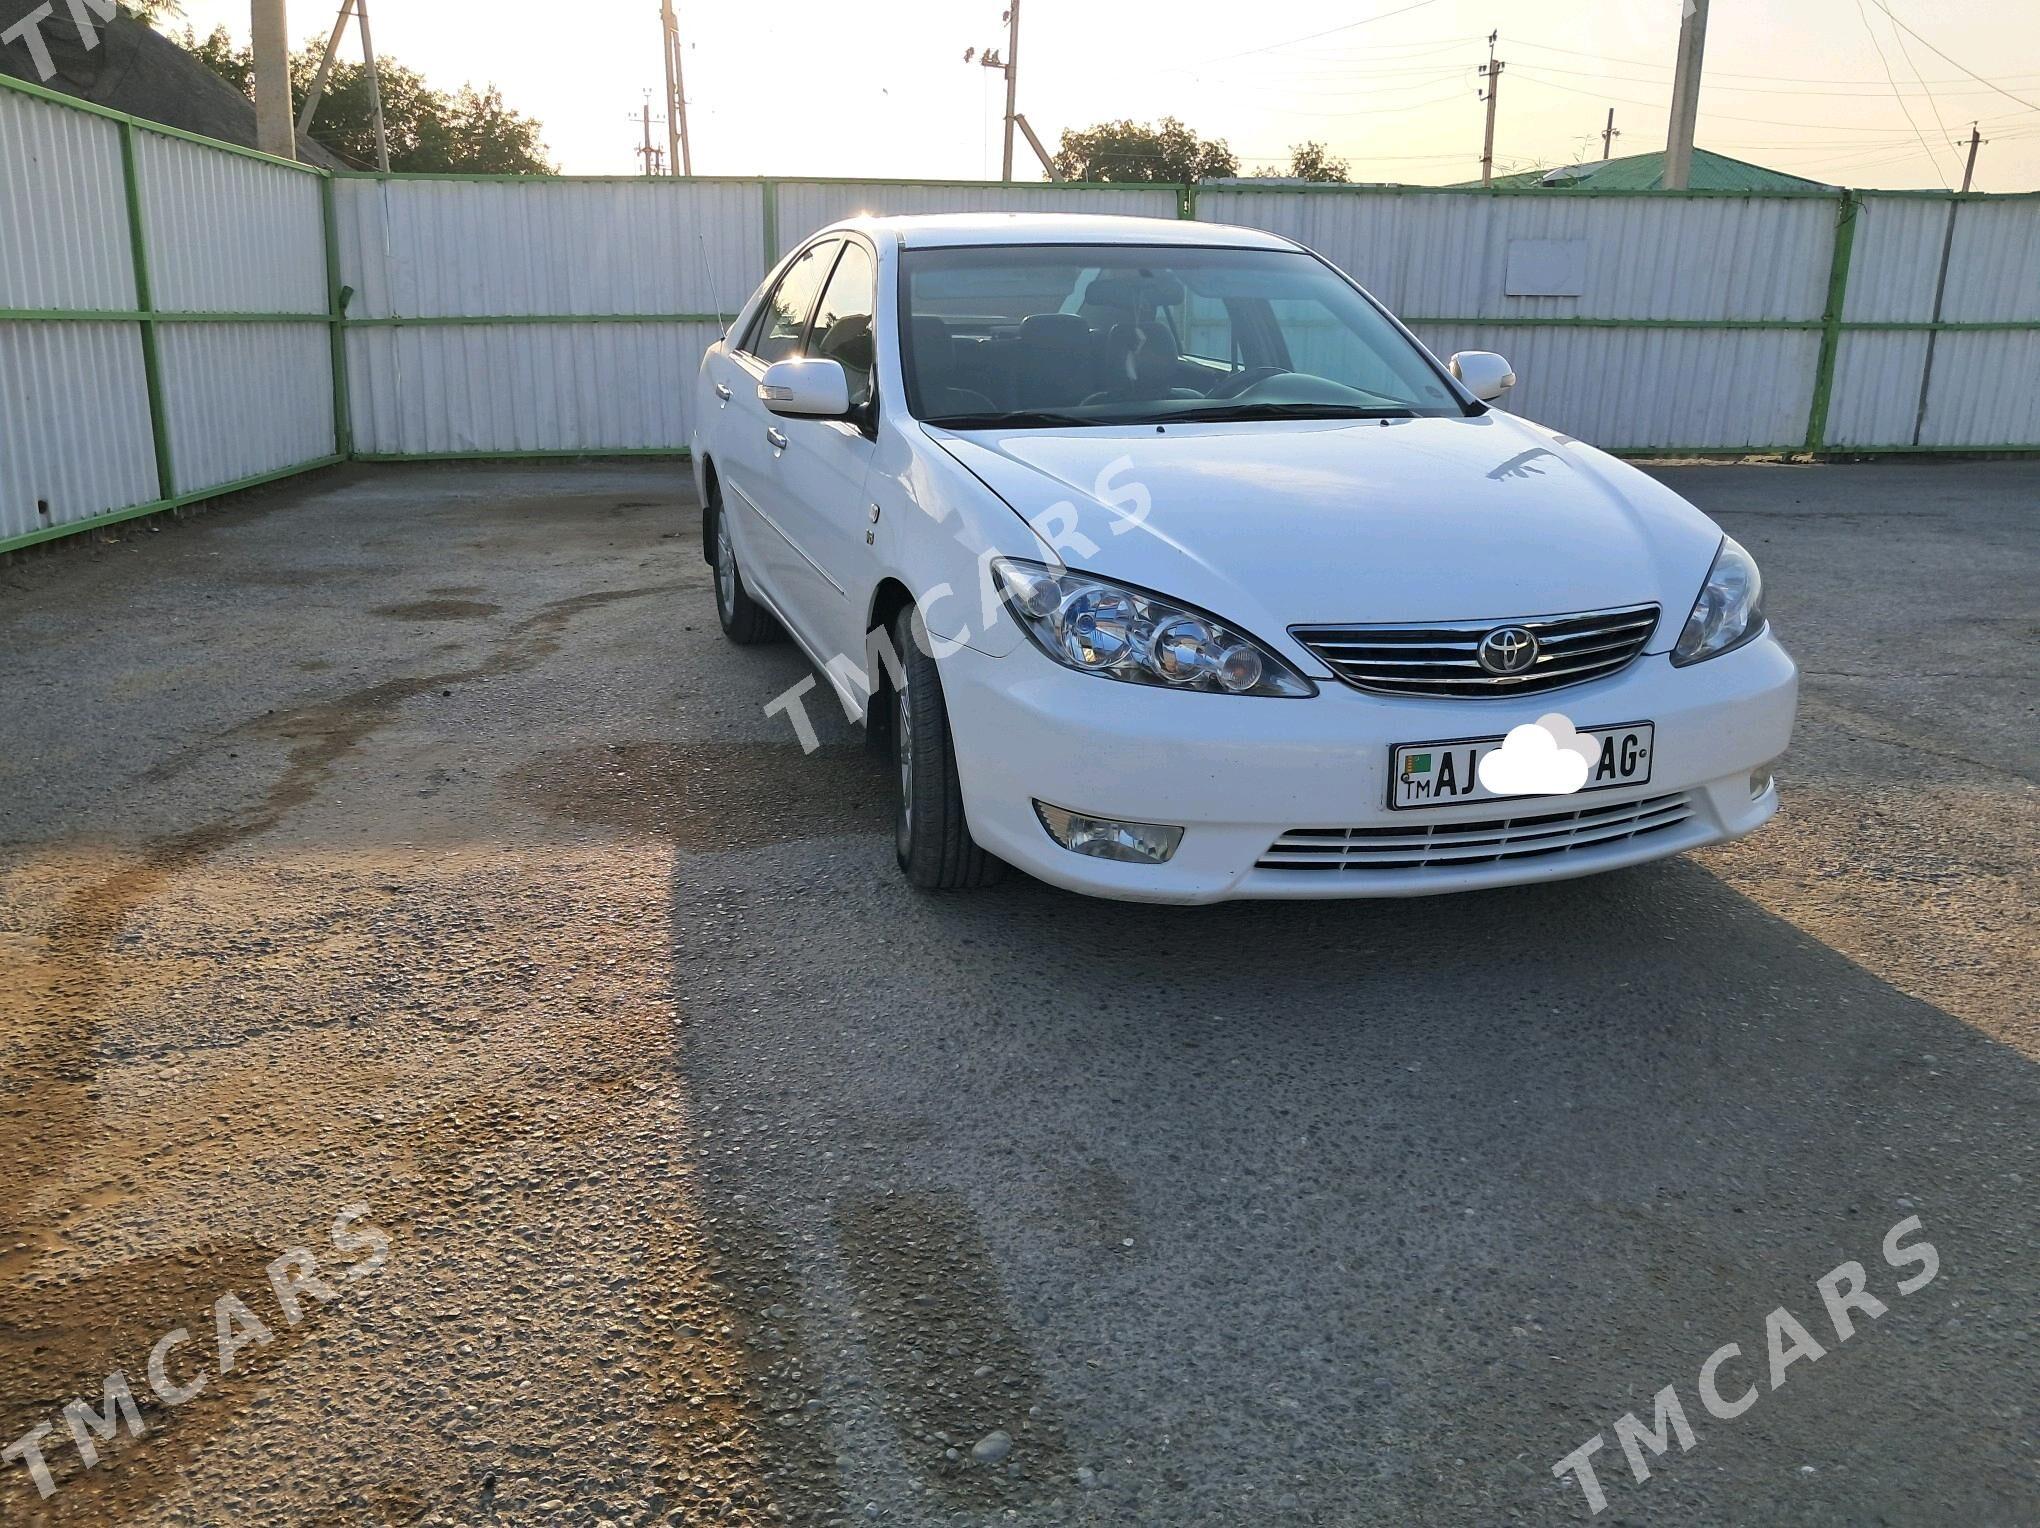 Toyota Camry 2002 - 154 000 TMT - Arzuw - img 2